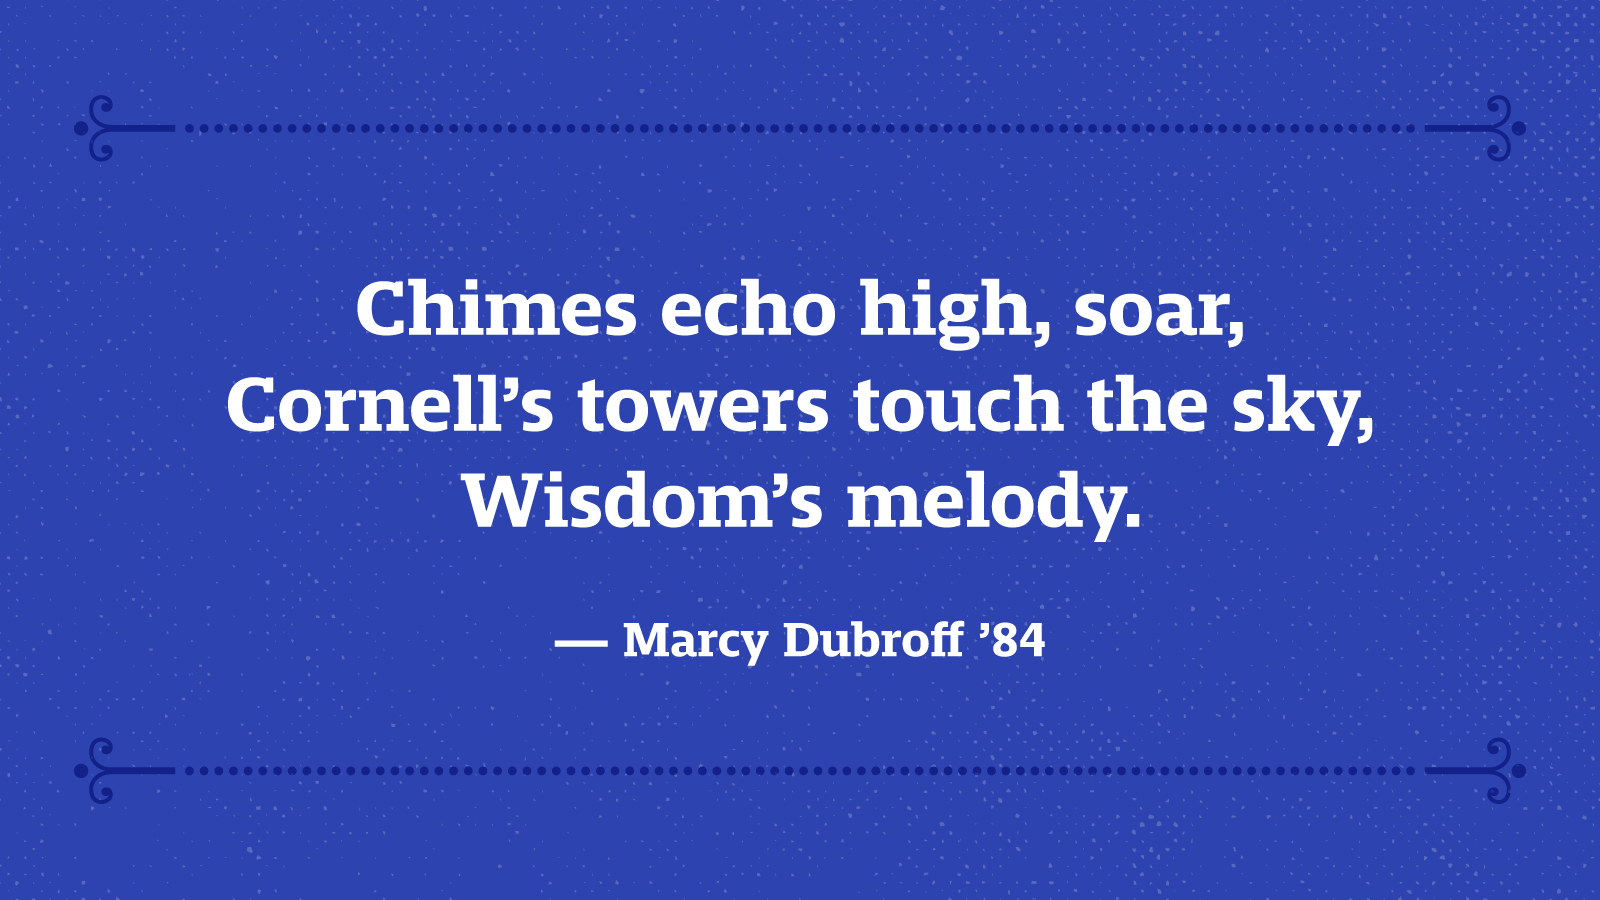 Chimes echo high, soar, Cornell’s towers touch the sky, Wisdom’s melody. — Marcy Dubroff ’84